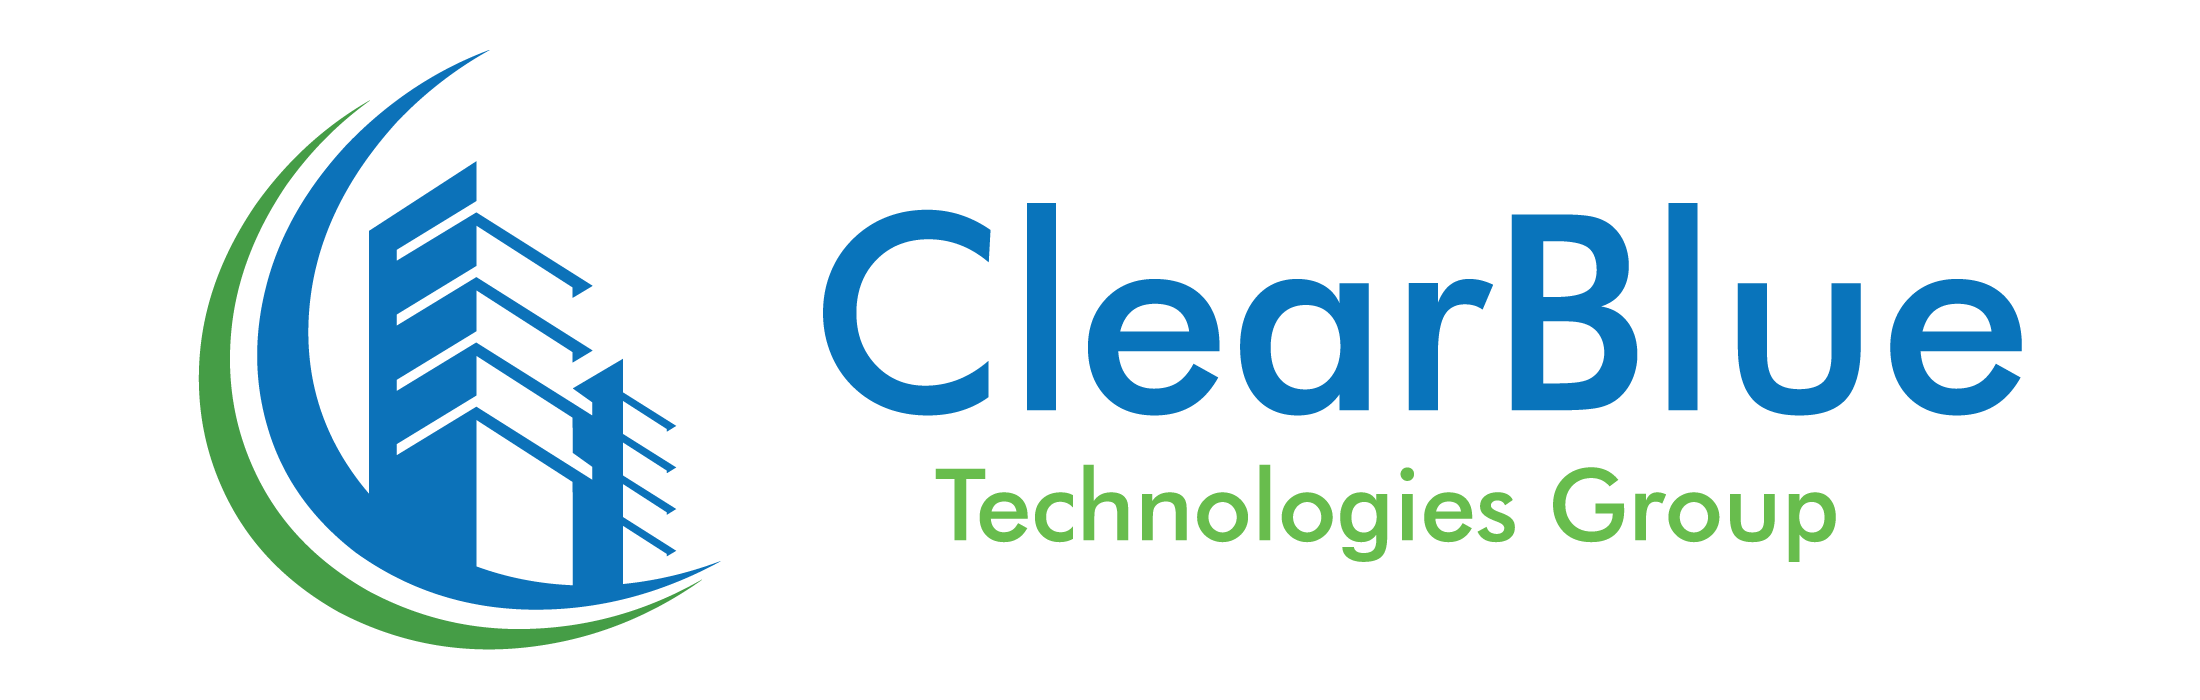 Clear Blue Logo - ClearBlue Technologies Group